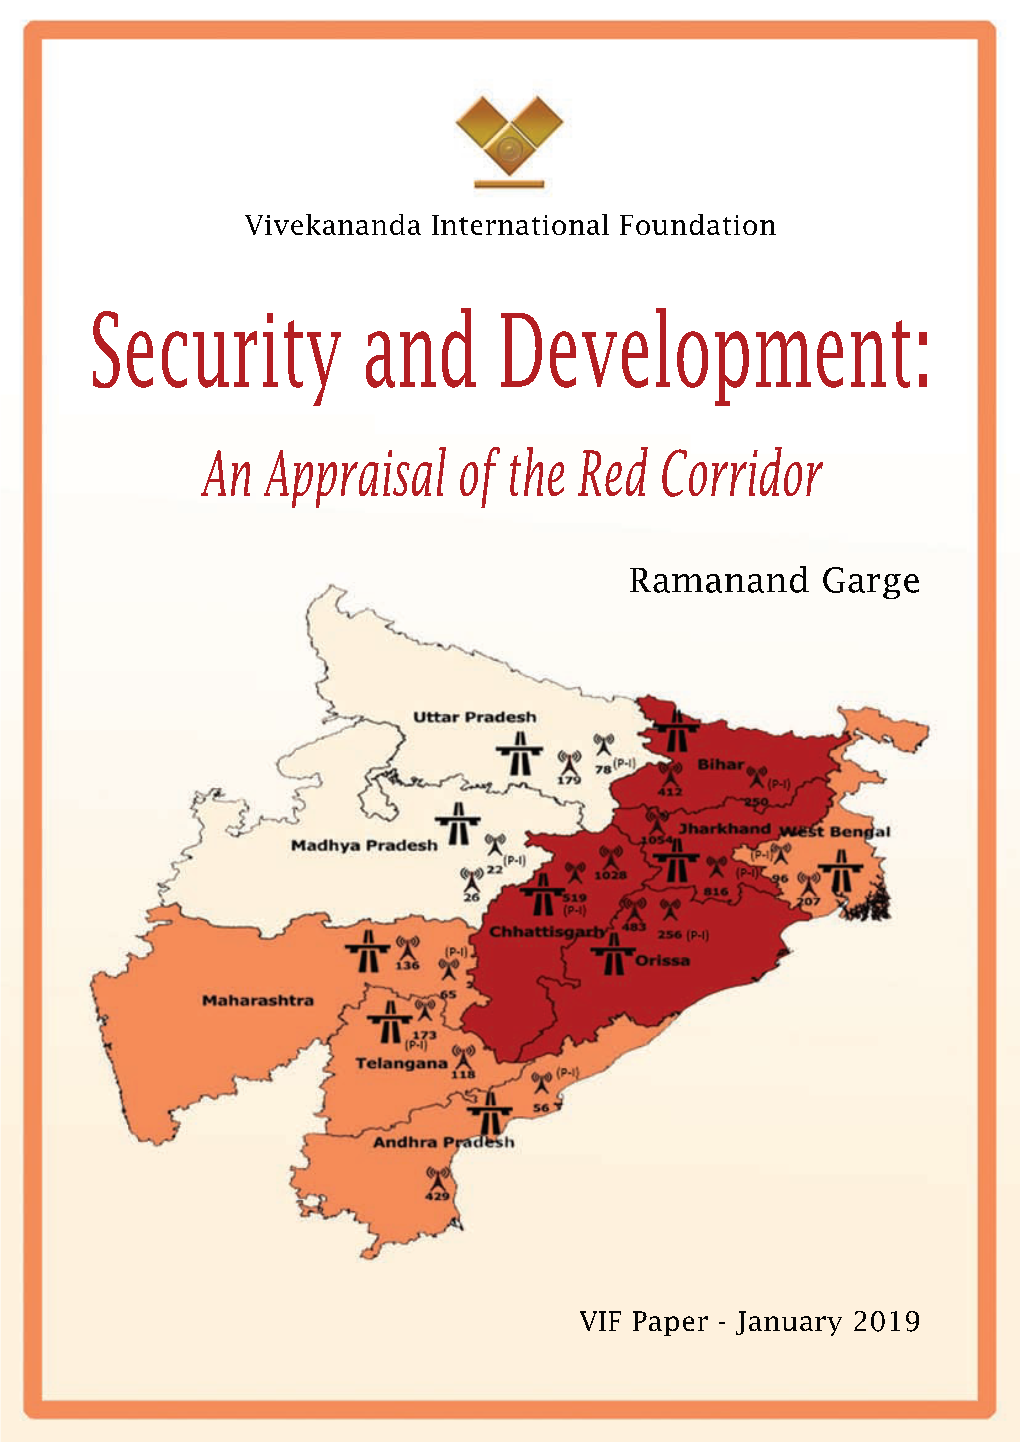 An Appraisal of the Red Corridor